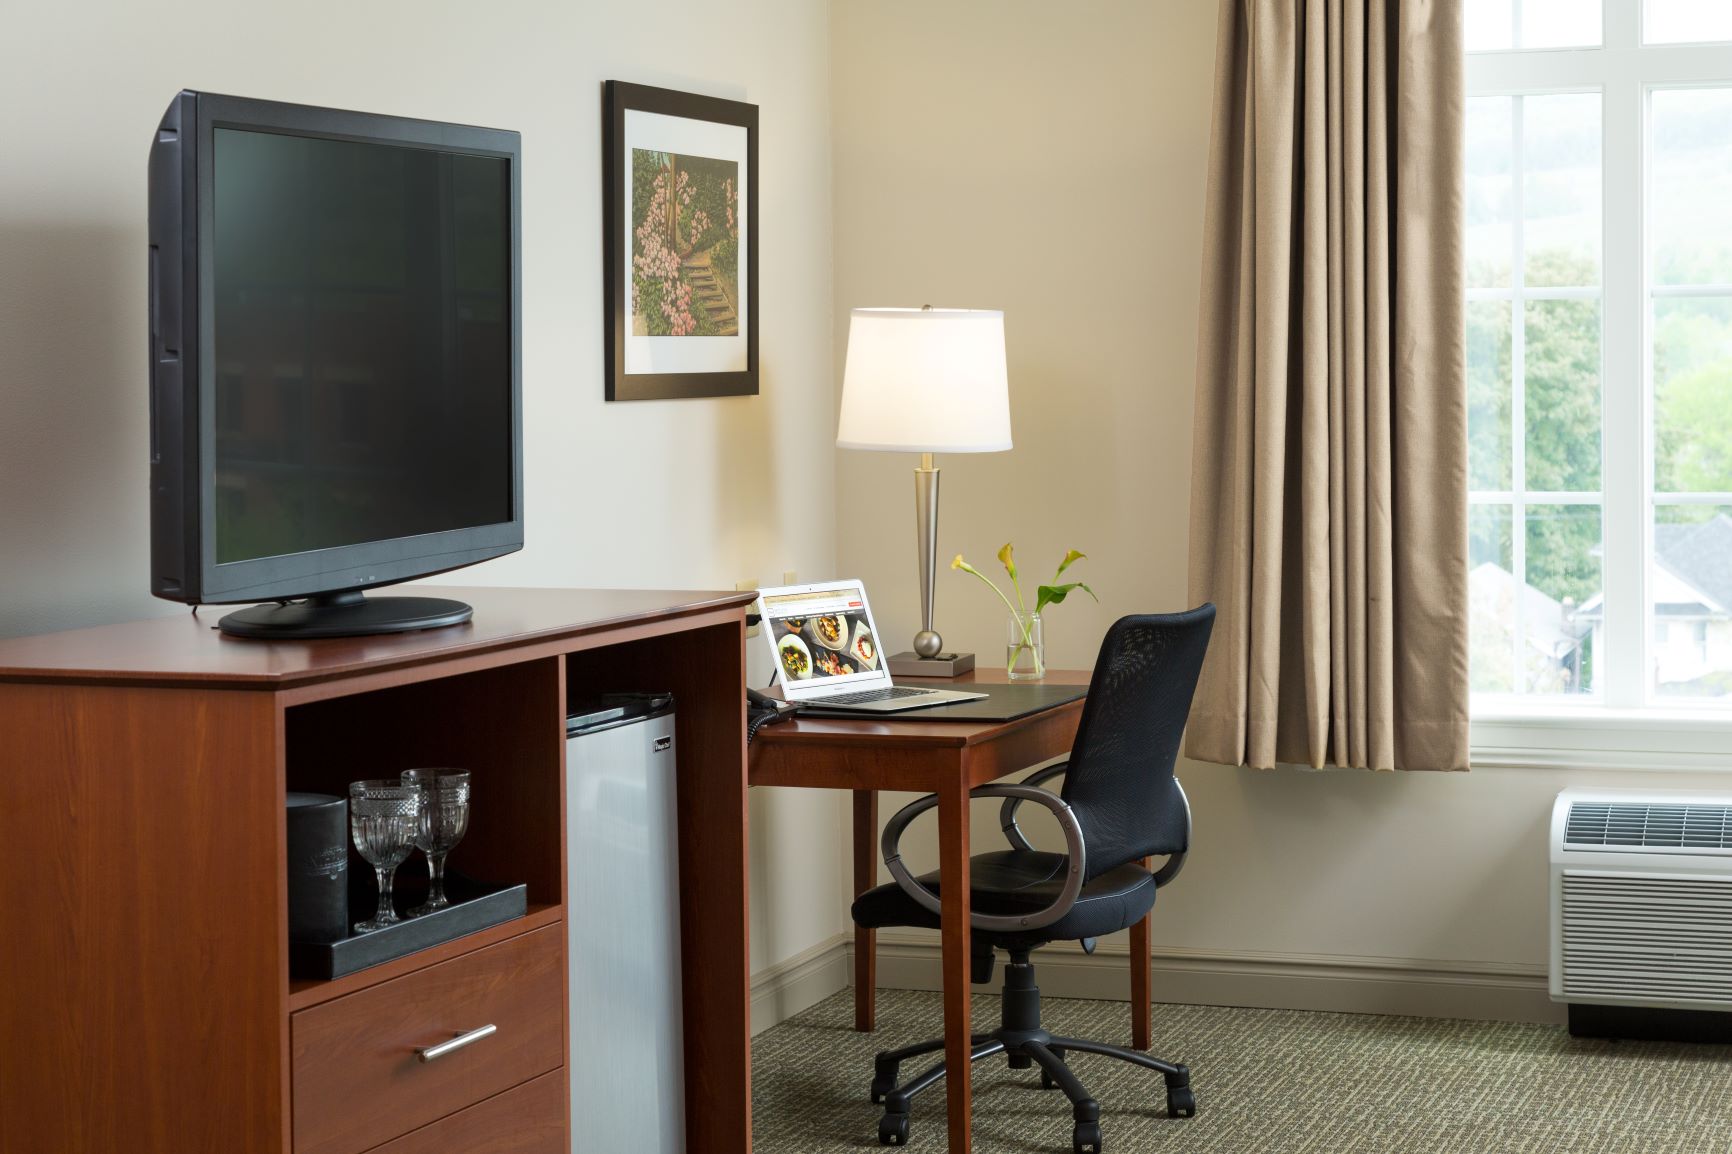 Guest Room with TV Refrigerator and desk with chair